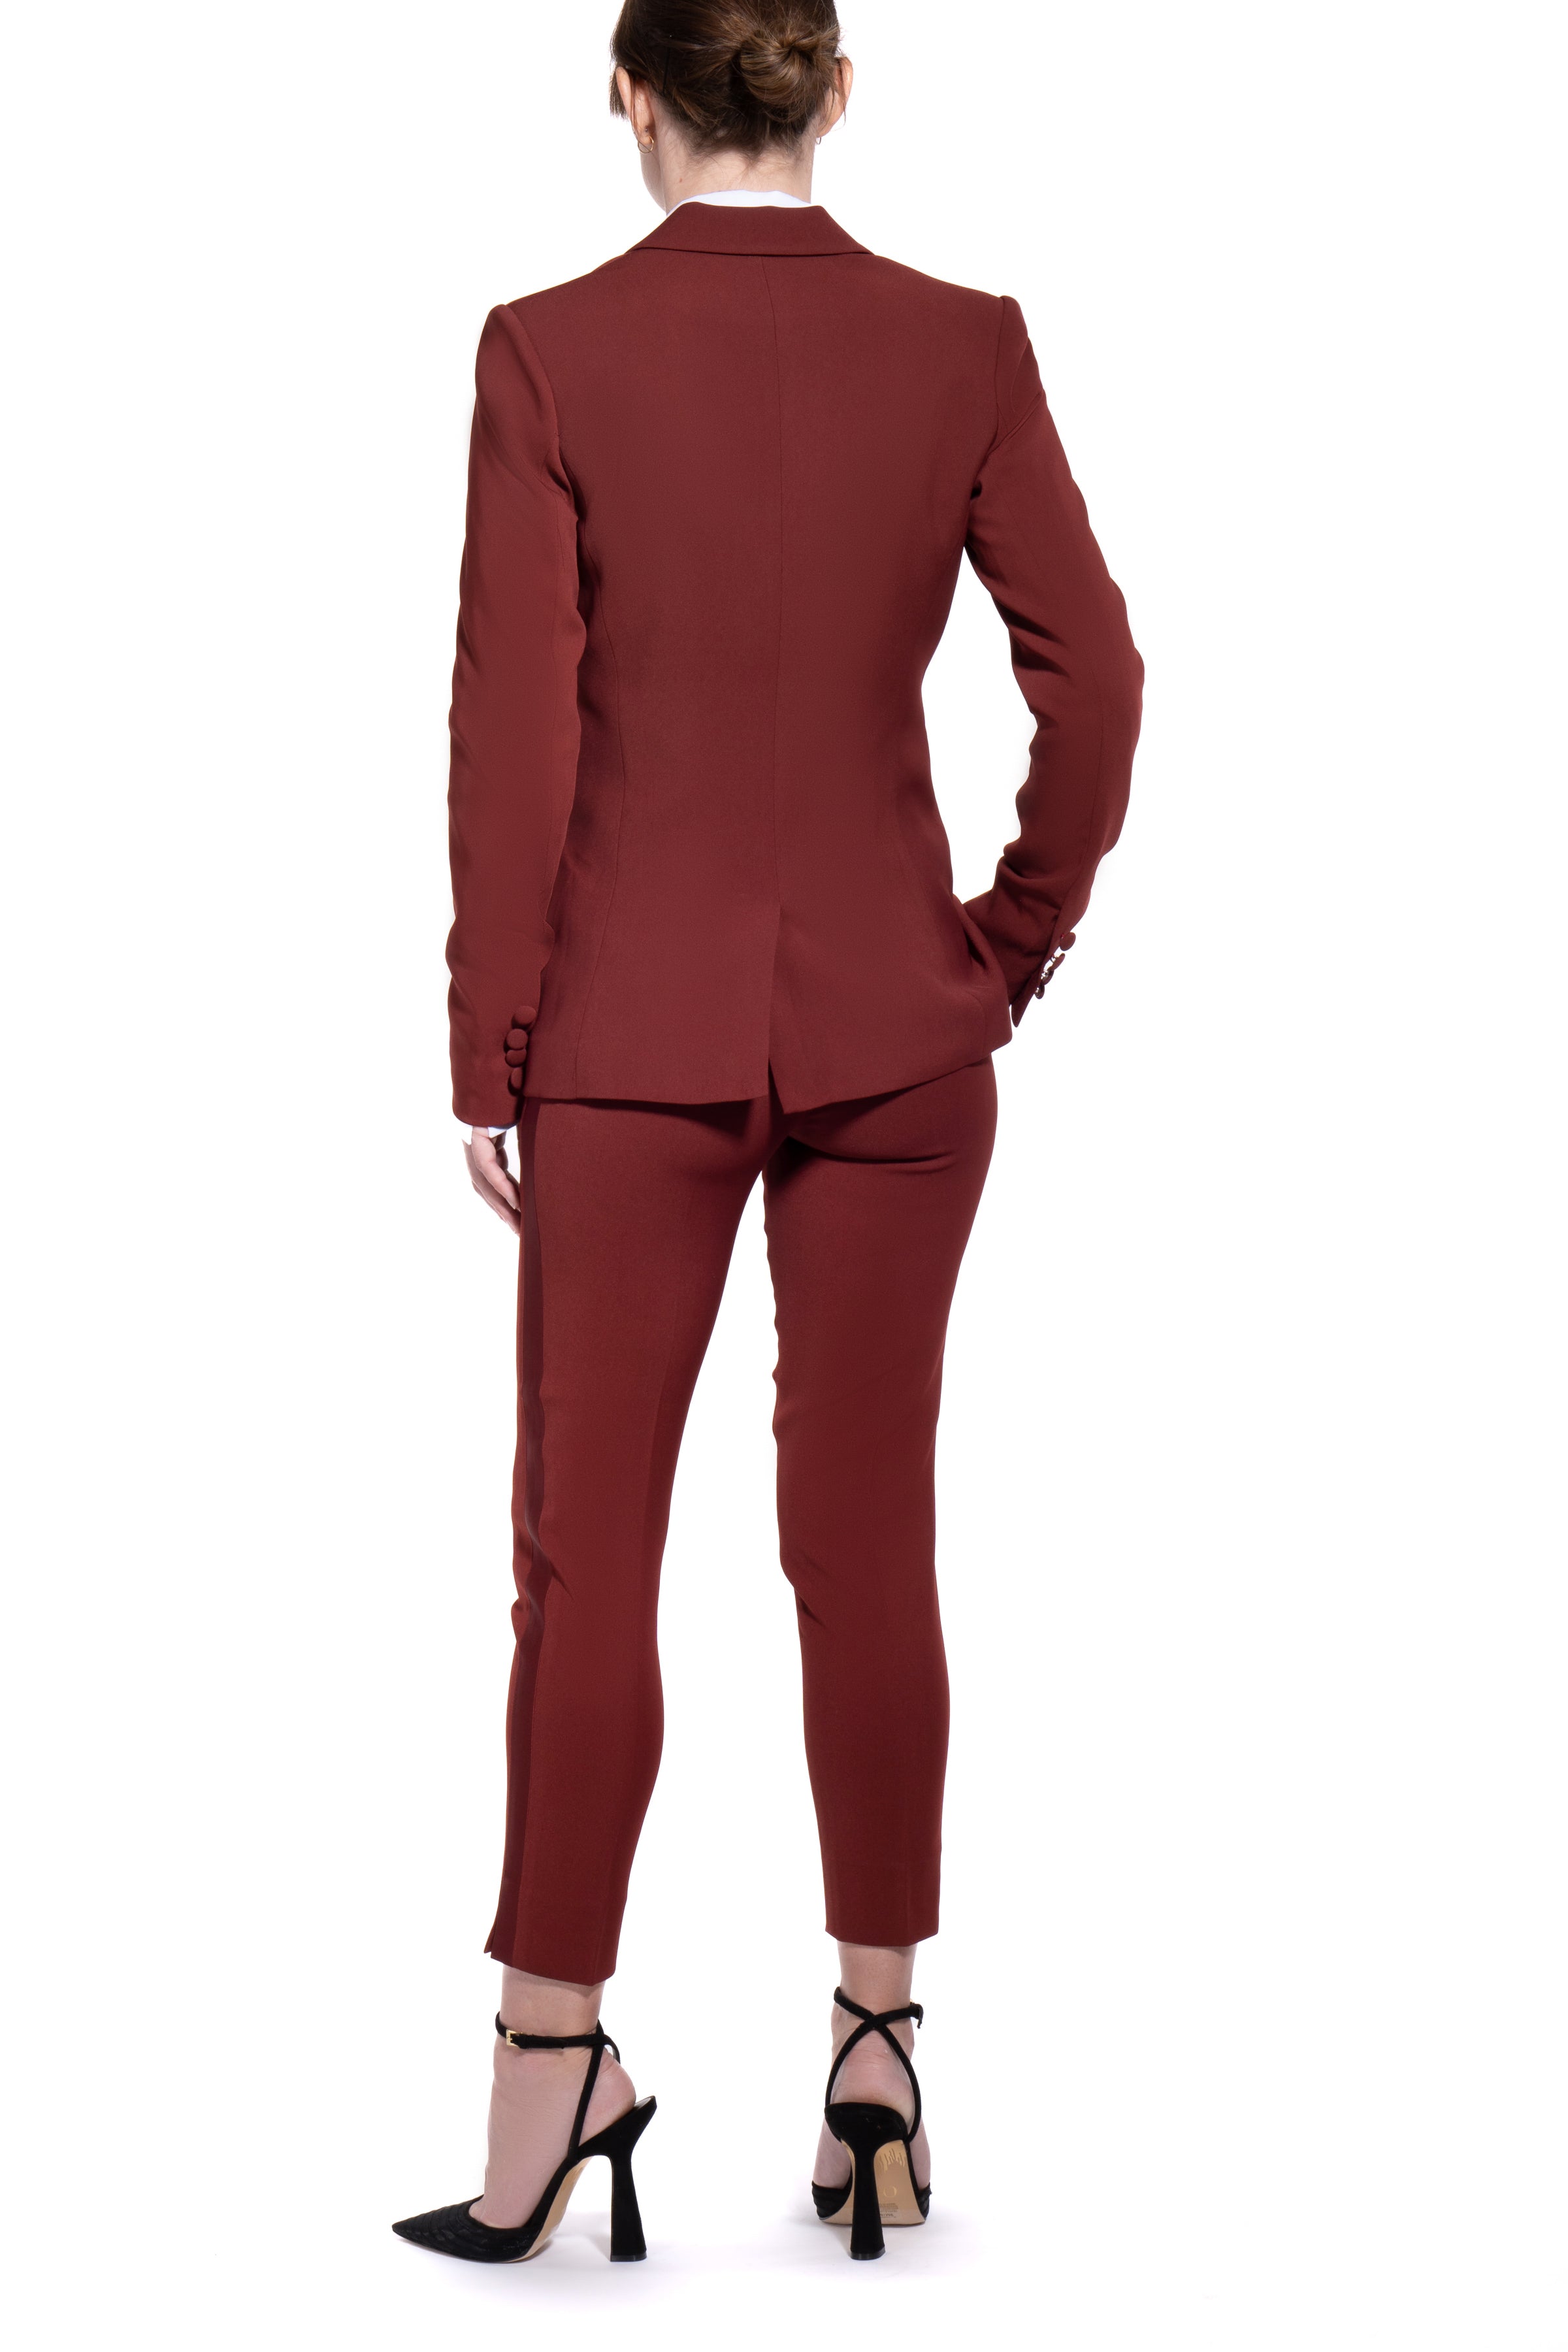 Buy Burgundy Suit Sets for Women by MIRAMOR CLOTHING Online | Ajio.com